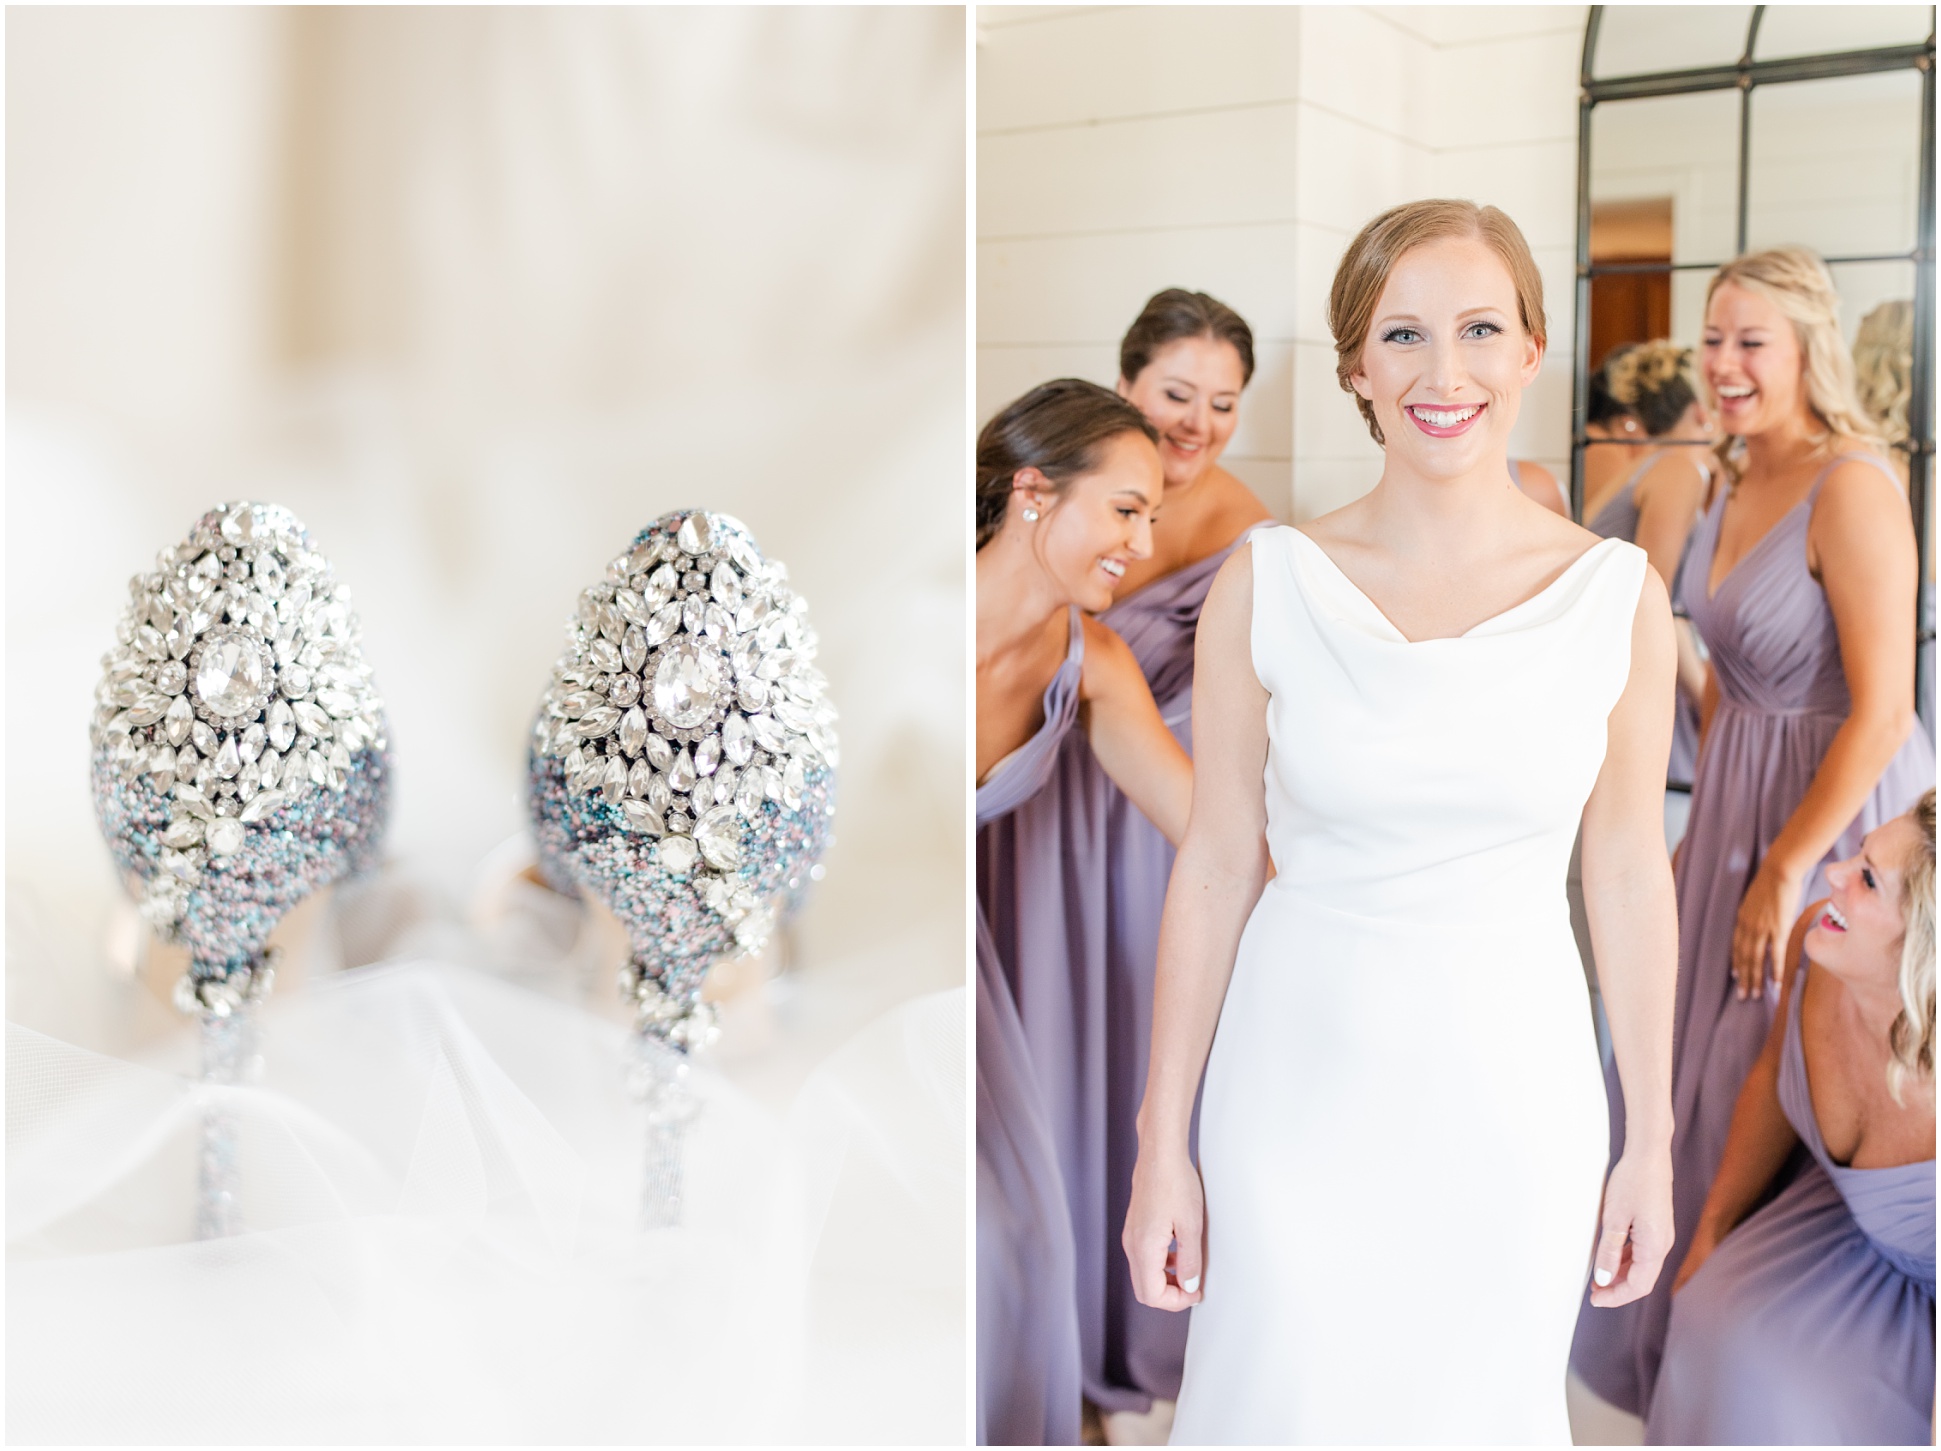 Left: Stiletto heals with diamonds and gems on the back, right: bride getting ready with bridesmaids